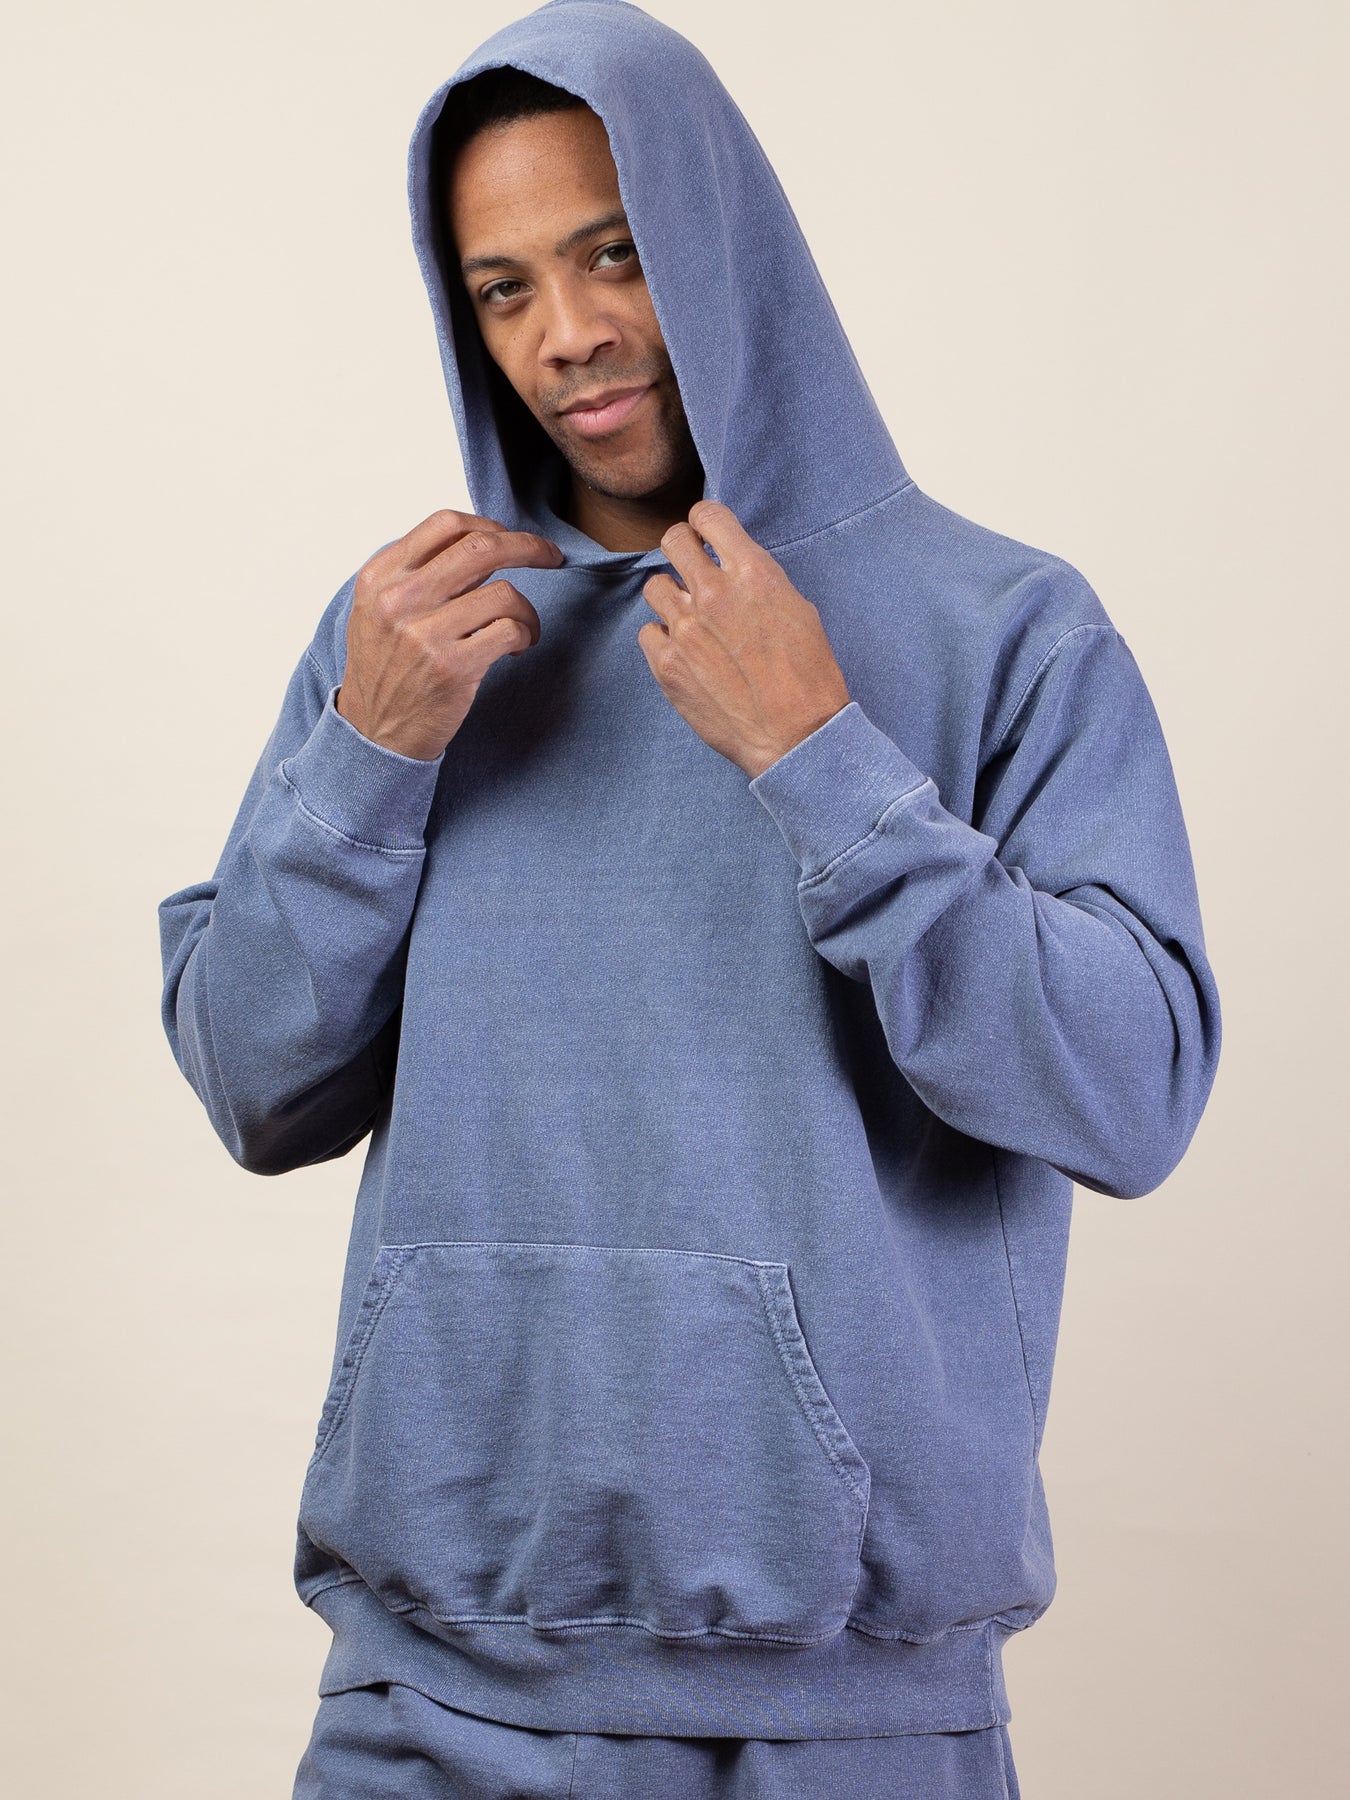 Hoodie Manufacturer, Too Fabric